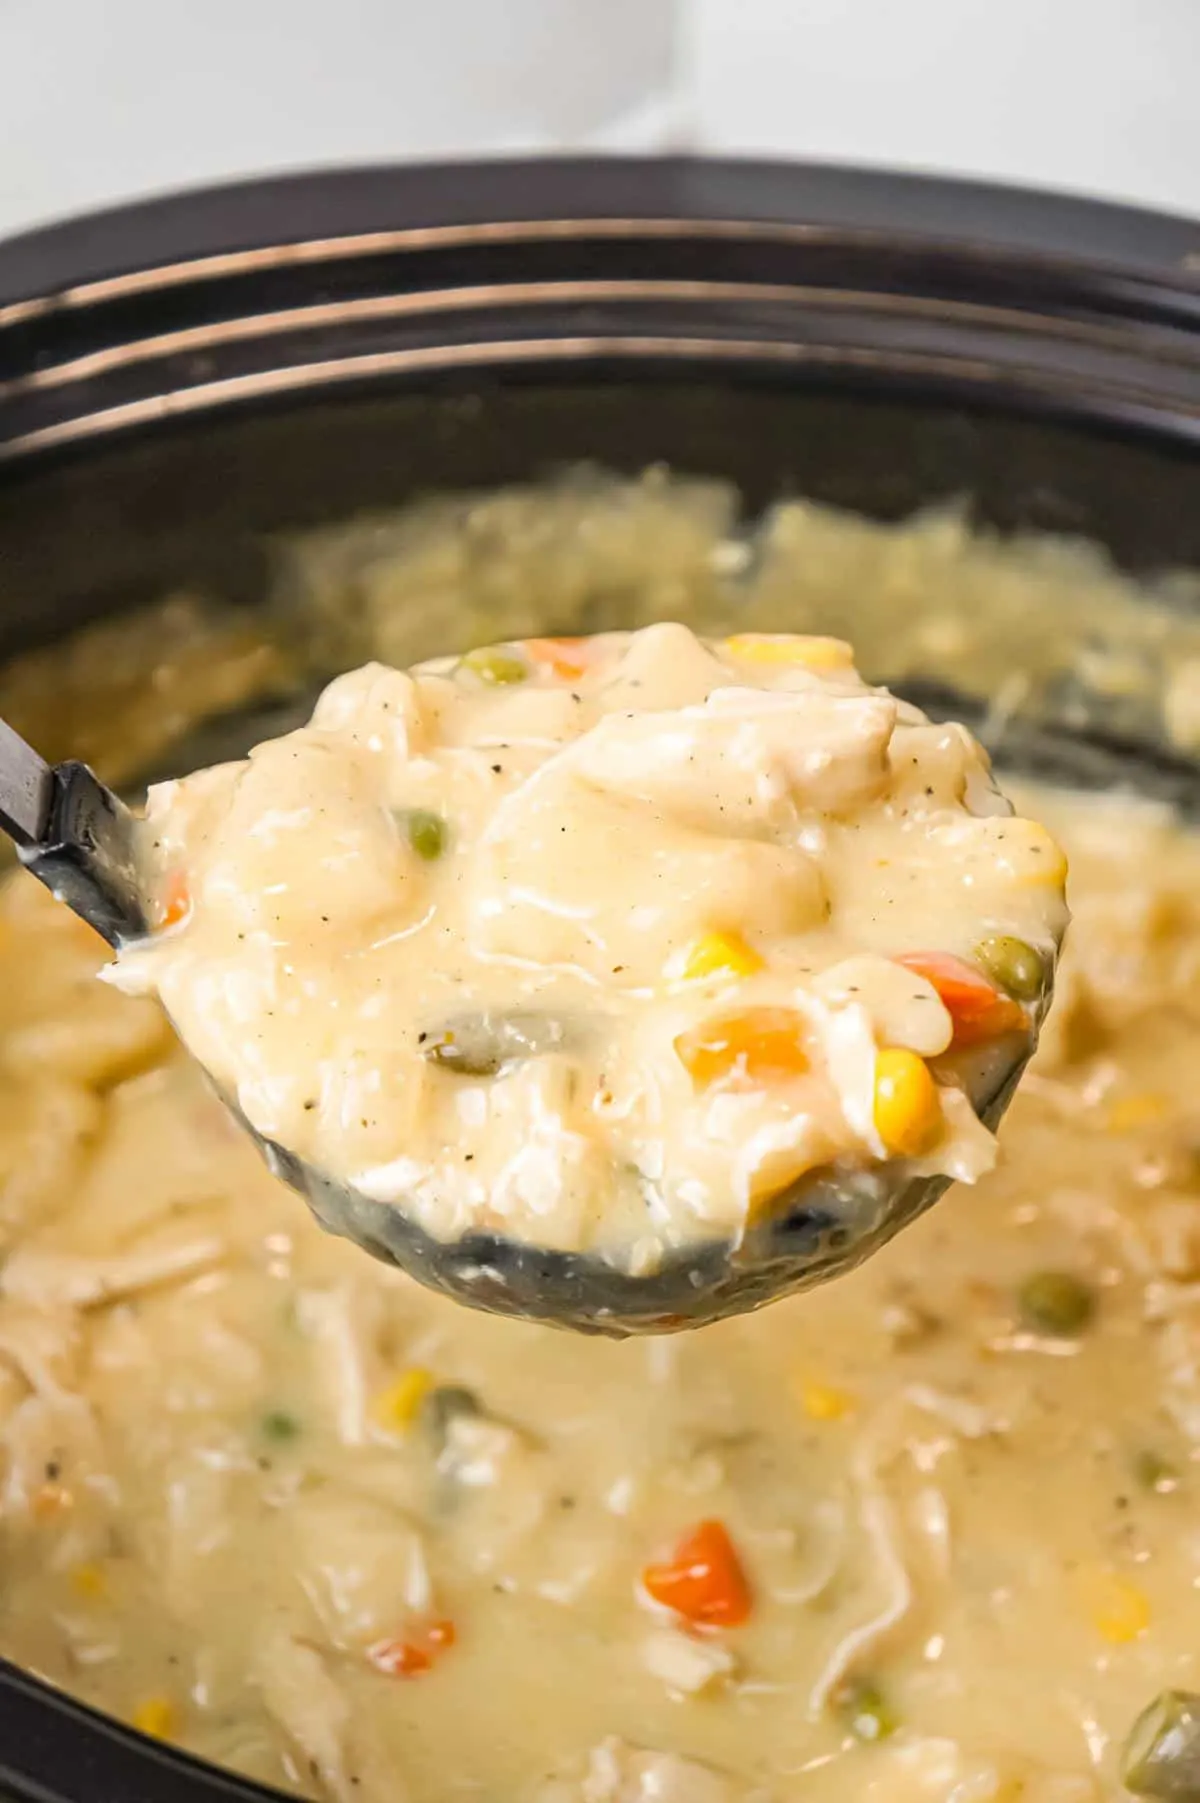 Crock Pot Chicken and Dumplings is an easy slow cooker dinner recipe loaded with chicken breast, veggies and Pillsbury biscuit dough dumplings all in a creamy sauce.